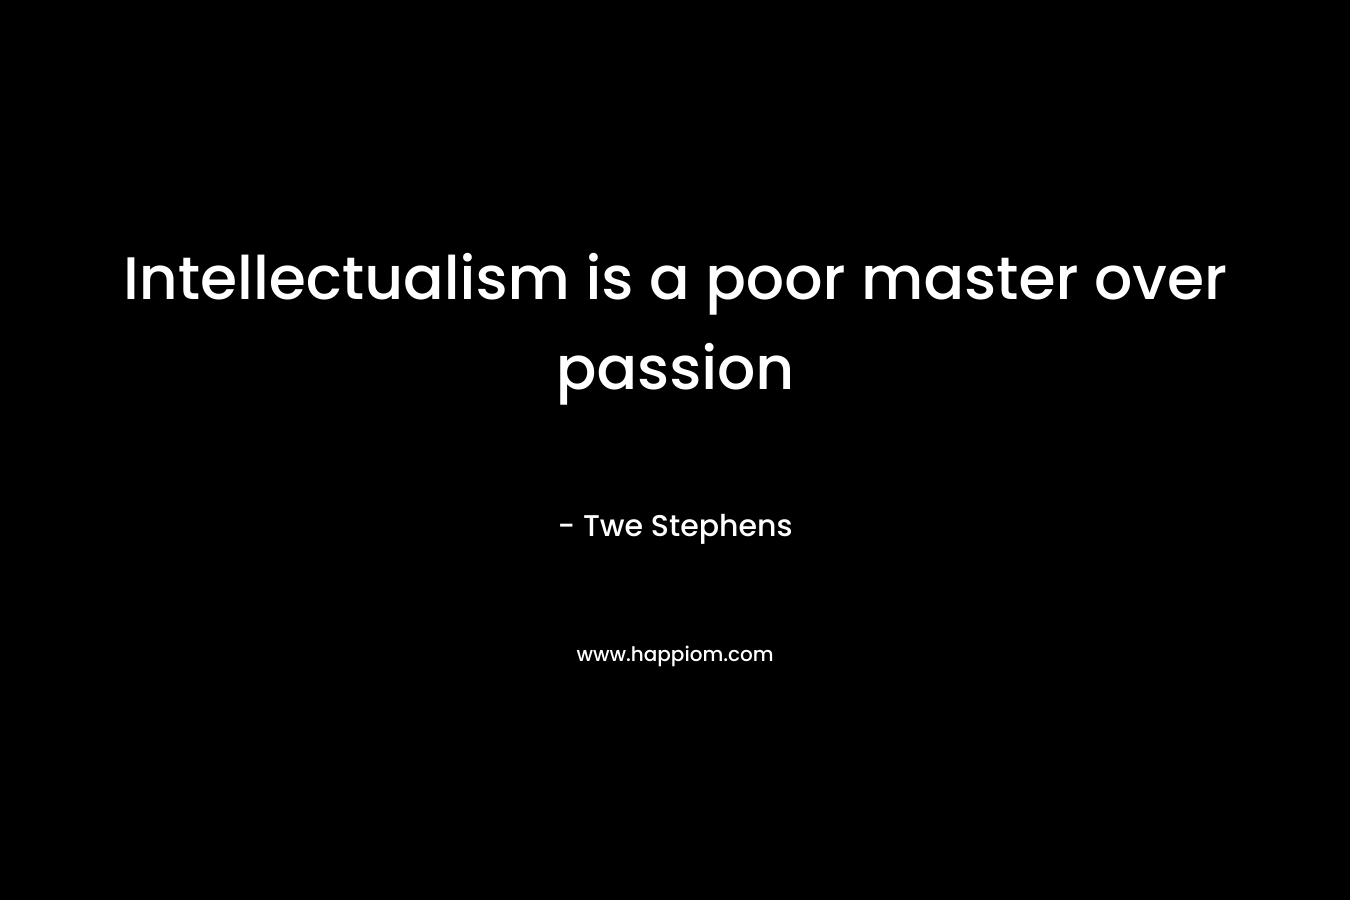 Intellectualism is a poor master over passion